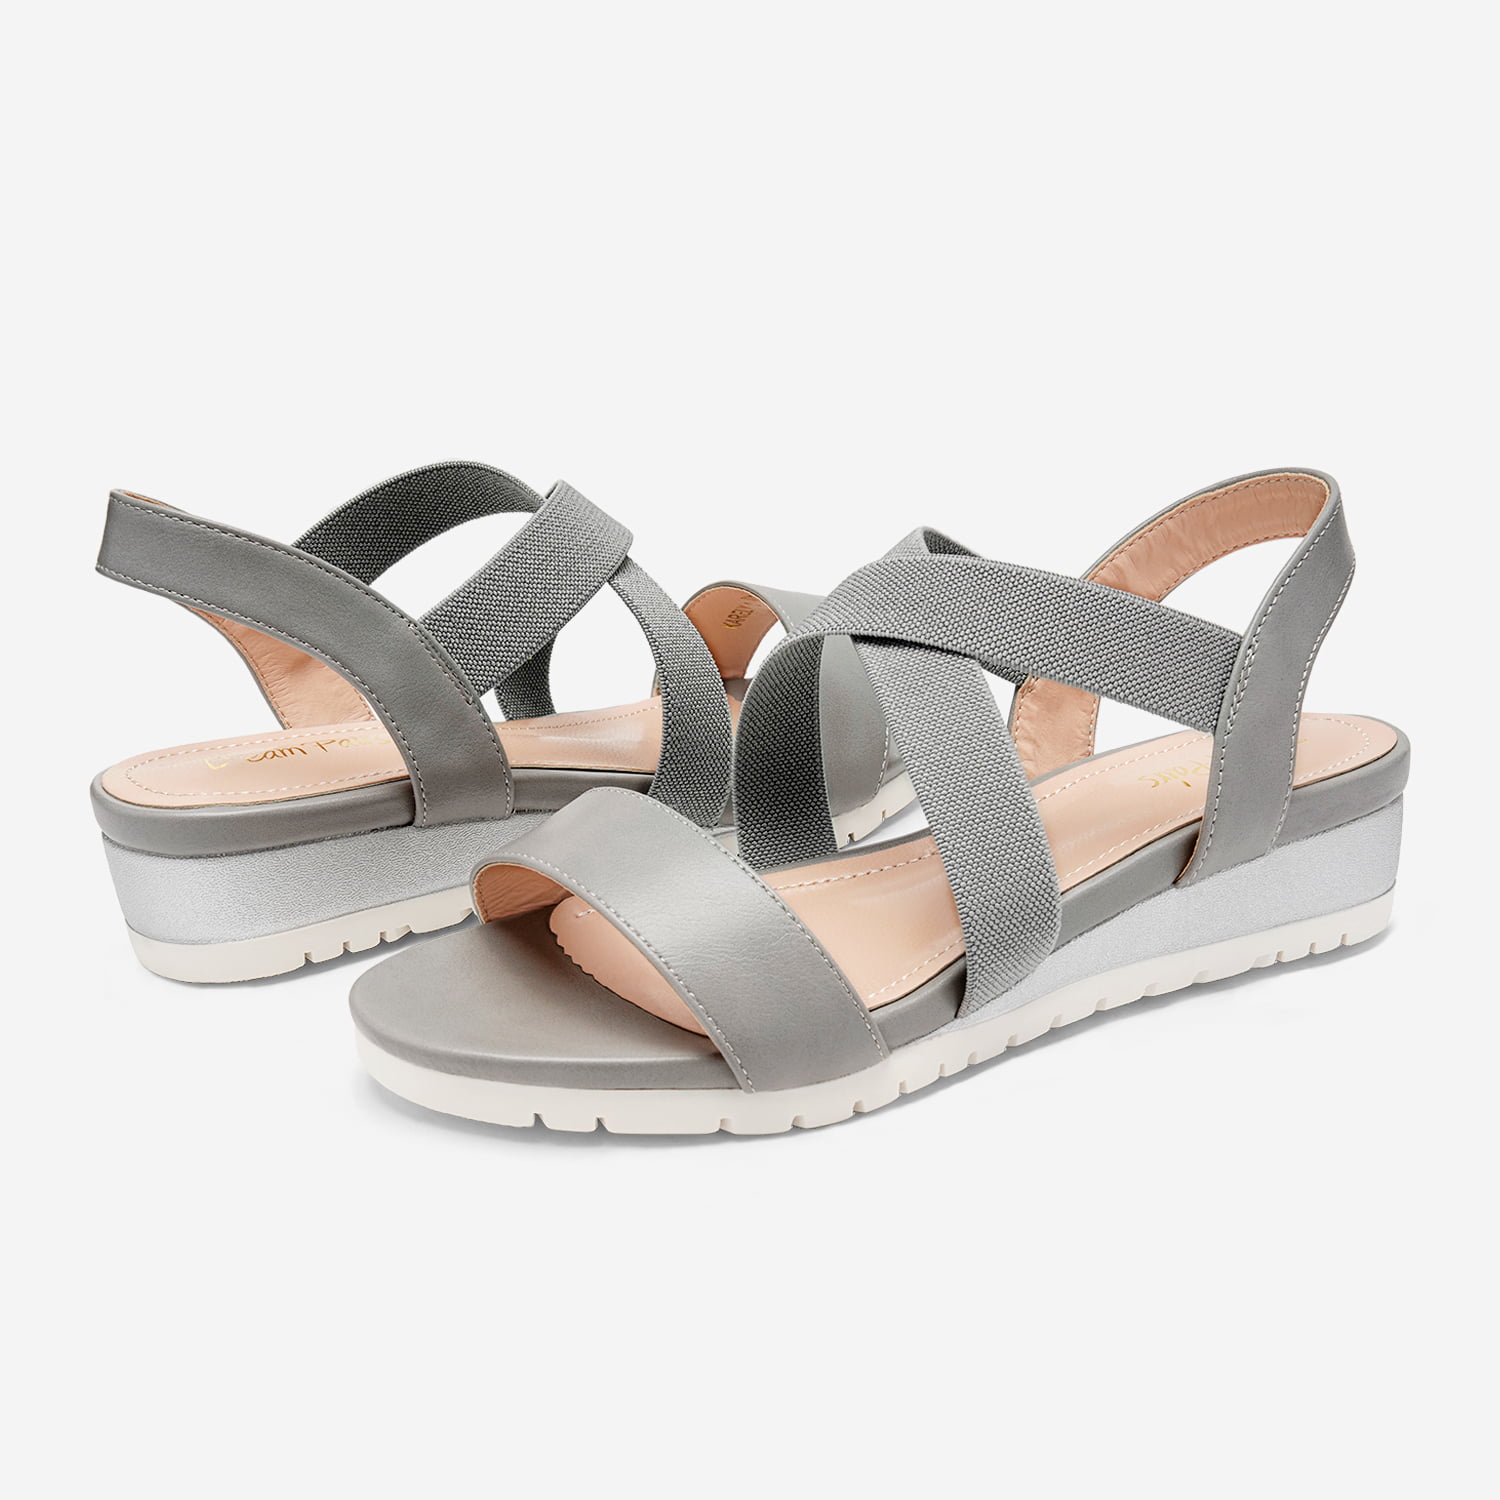 Dream Pairs - PAIRS Wedge for Casual Open Toe Ankle Strap Platform Cute Slingback Beach Wedge Sandals KARELY-1 LIGHT/GREY size 11 Walmart.com - Walmart.com